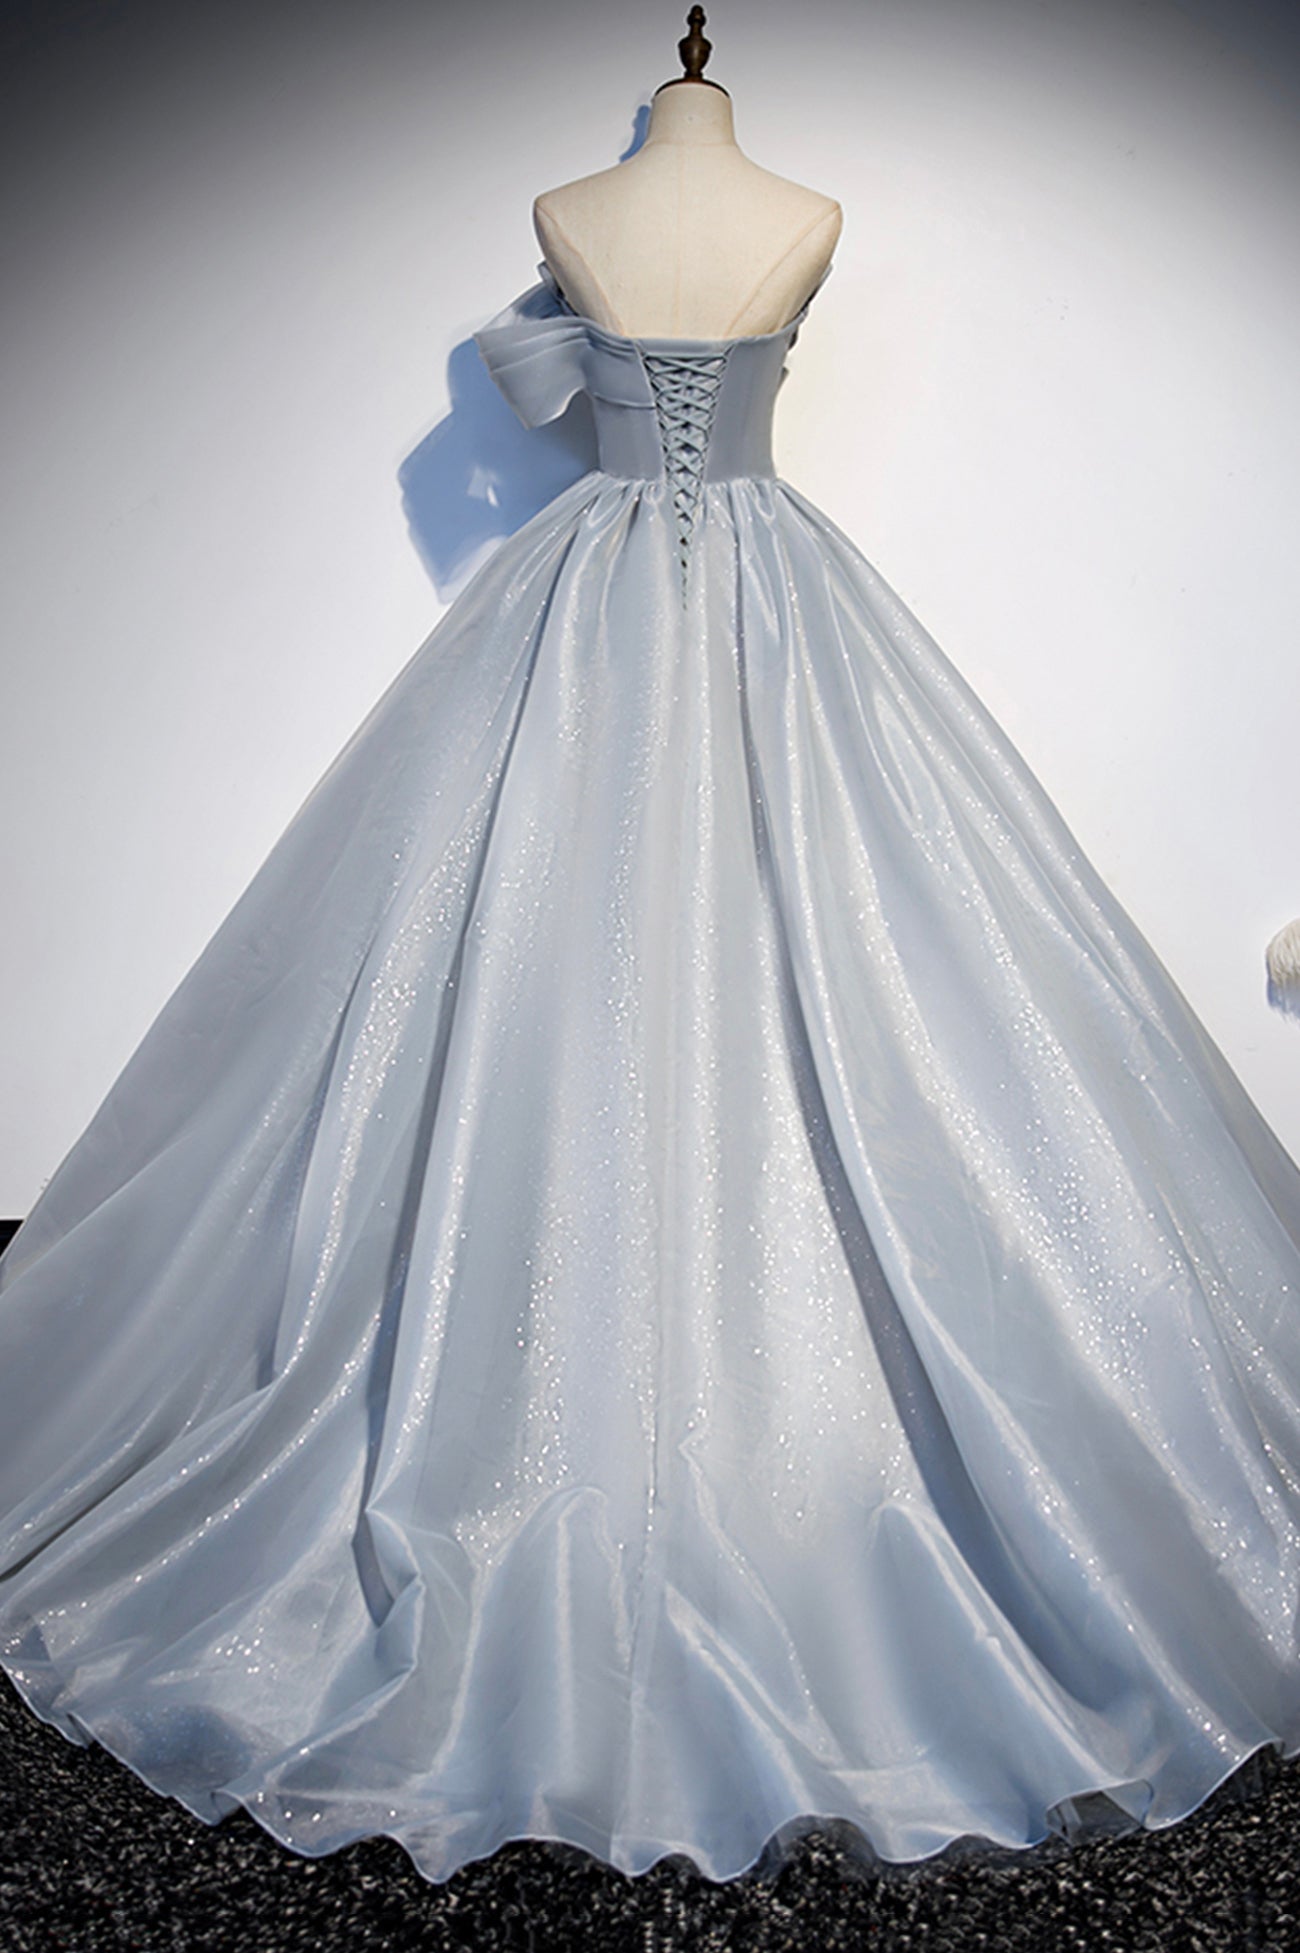 Elegant Dress, Gray Tulle Long A-Line Prom Dress, Gray Strapless Formal Evening Gown